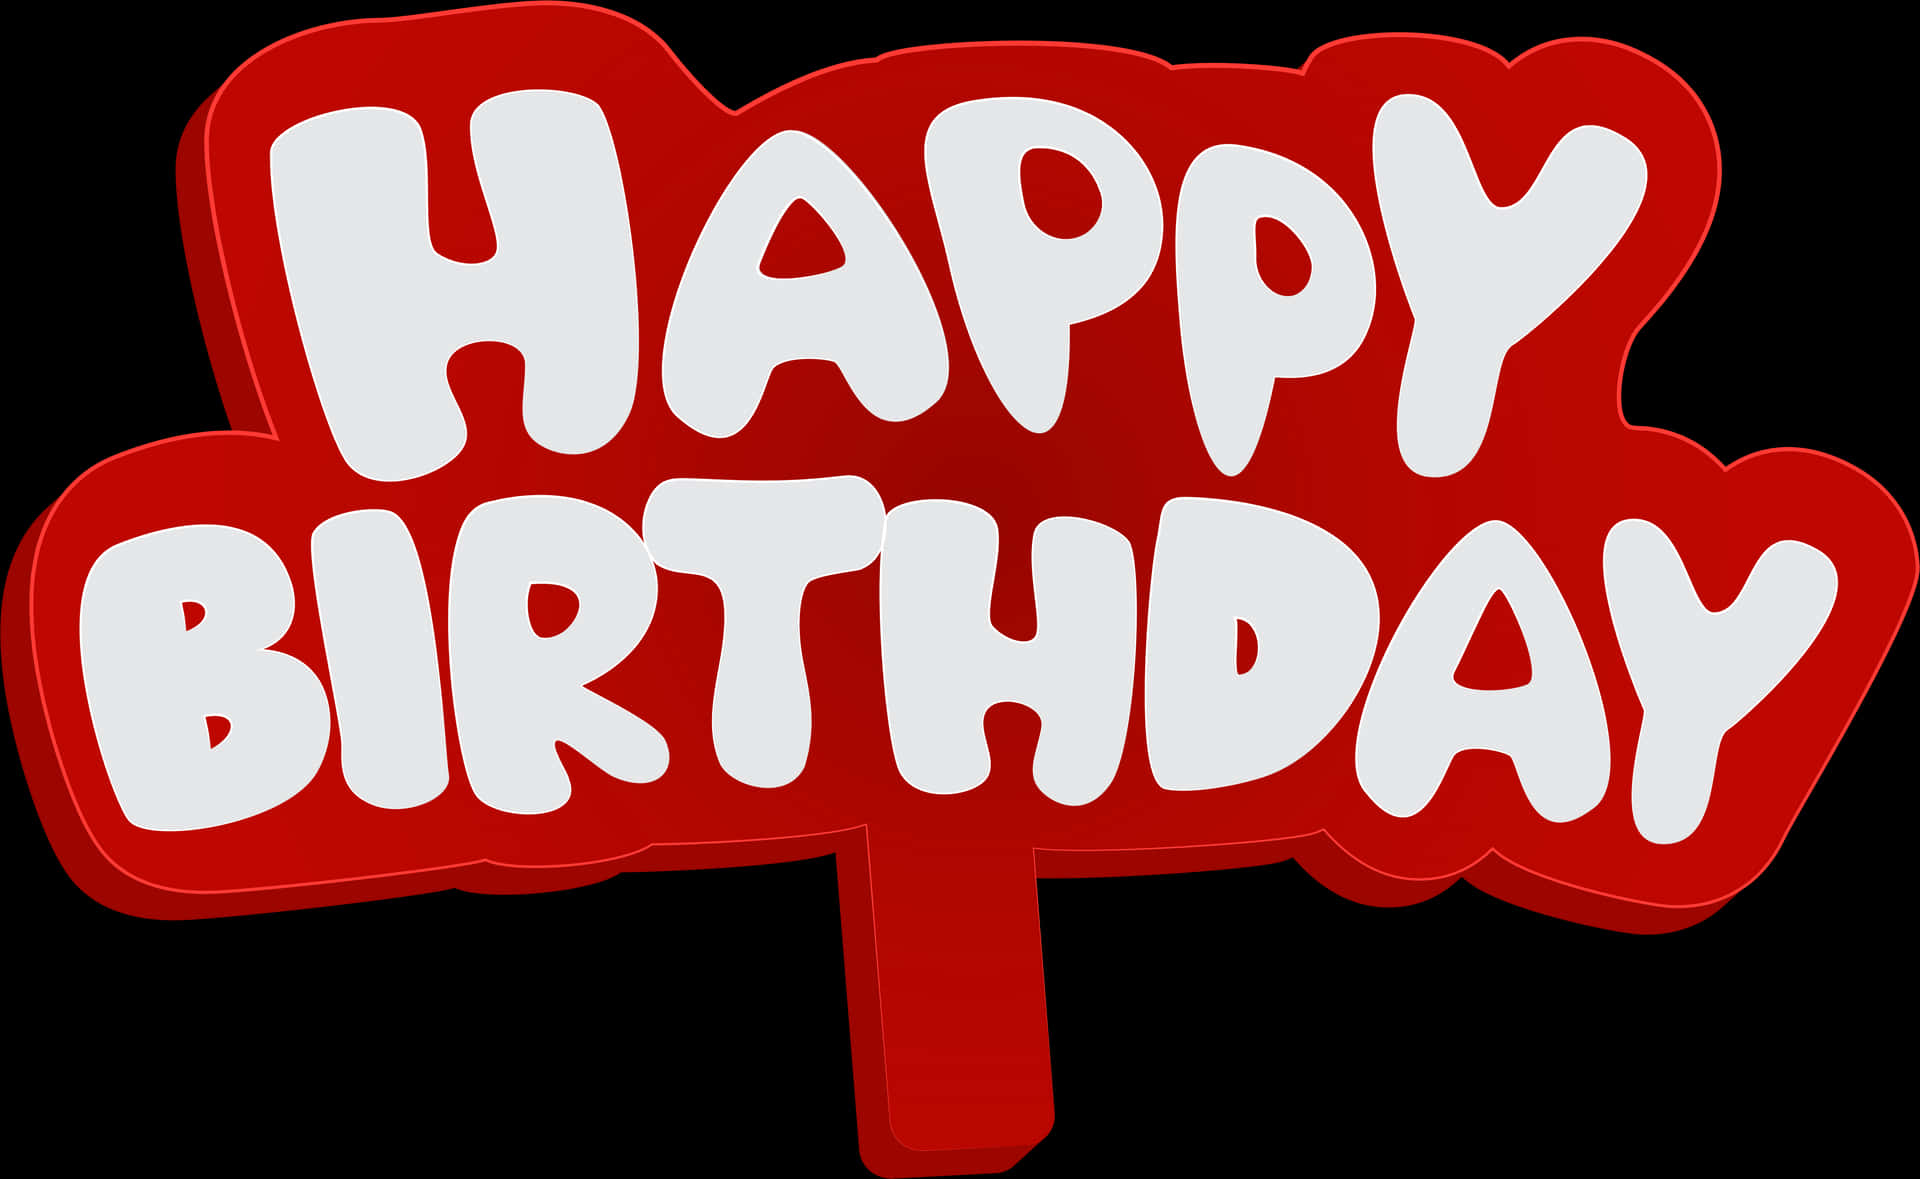 Happy Birthday Red Bubble Text PNG image